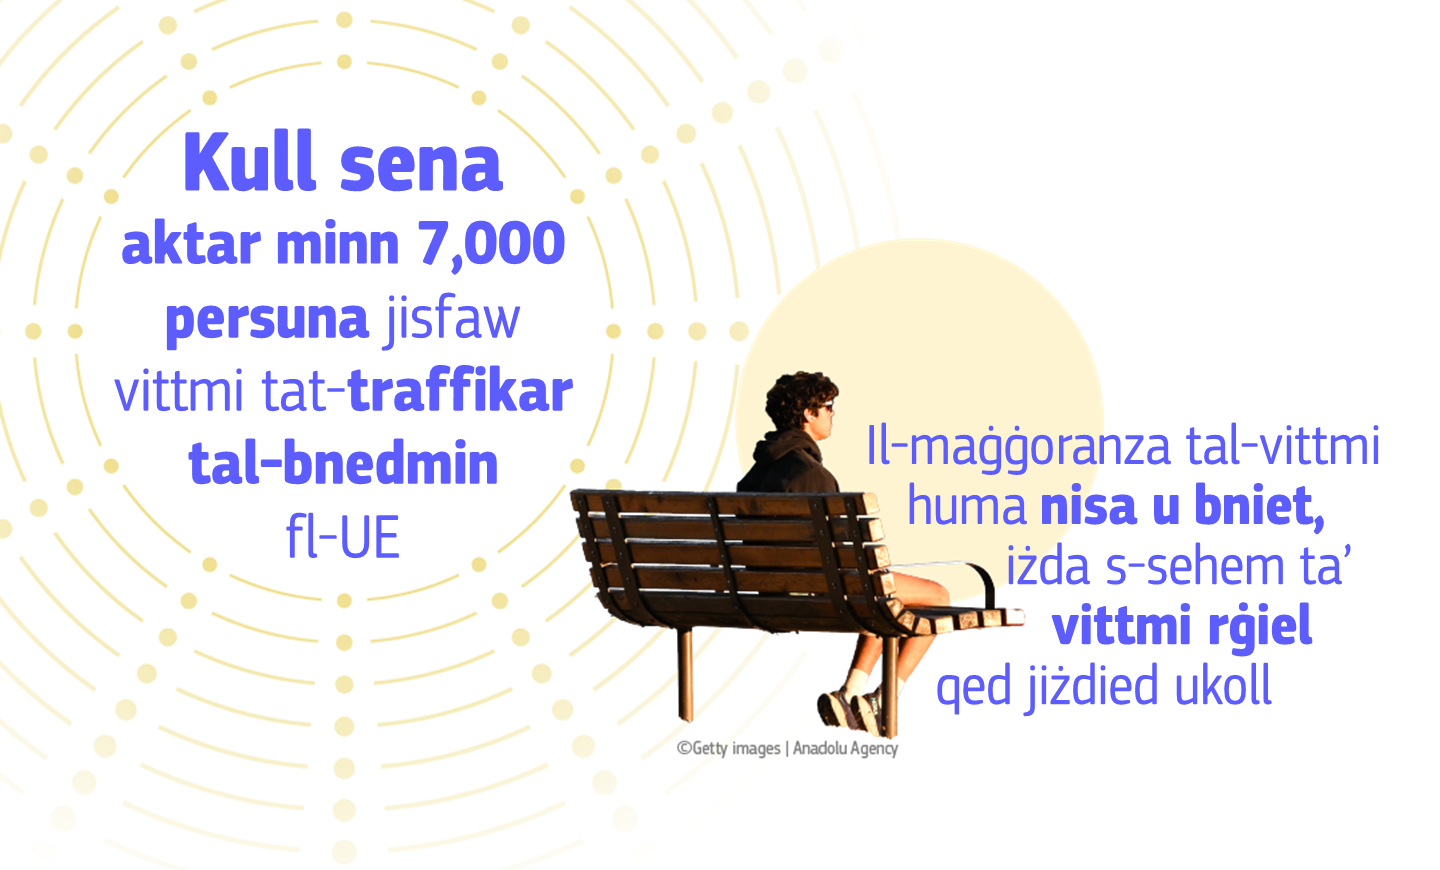 Infographic on EUs prevention and combatting of human trafficking